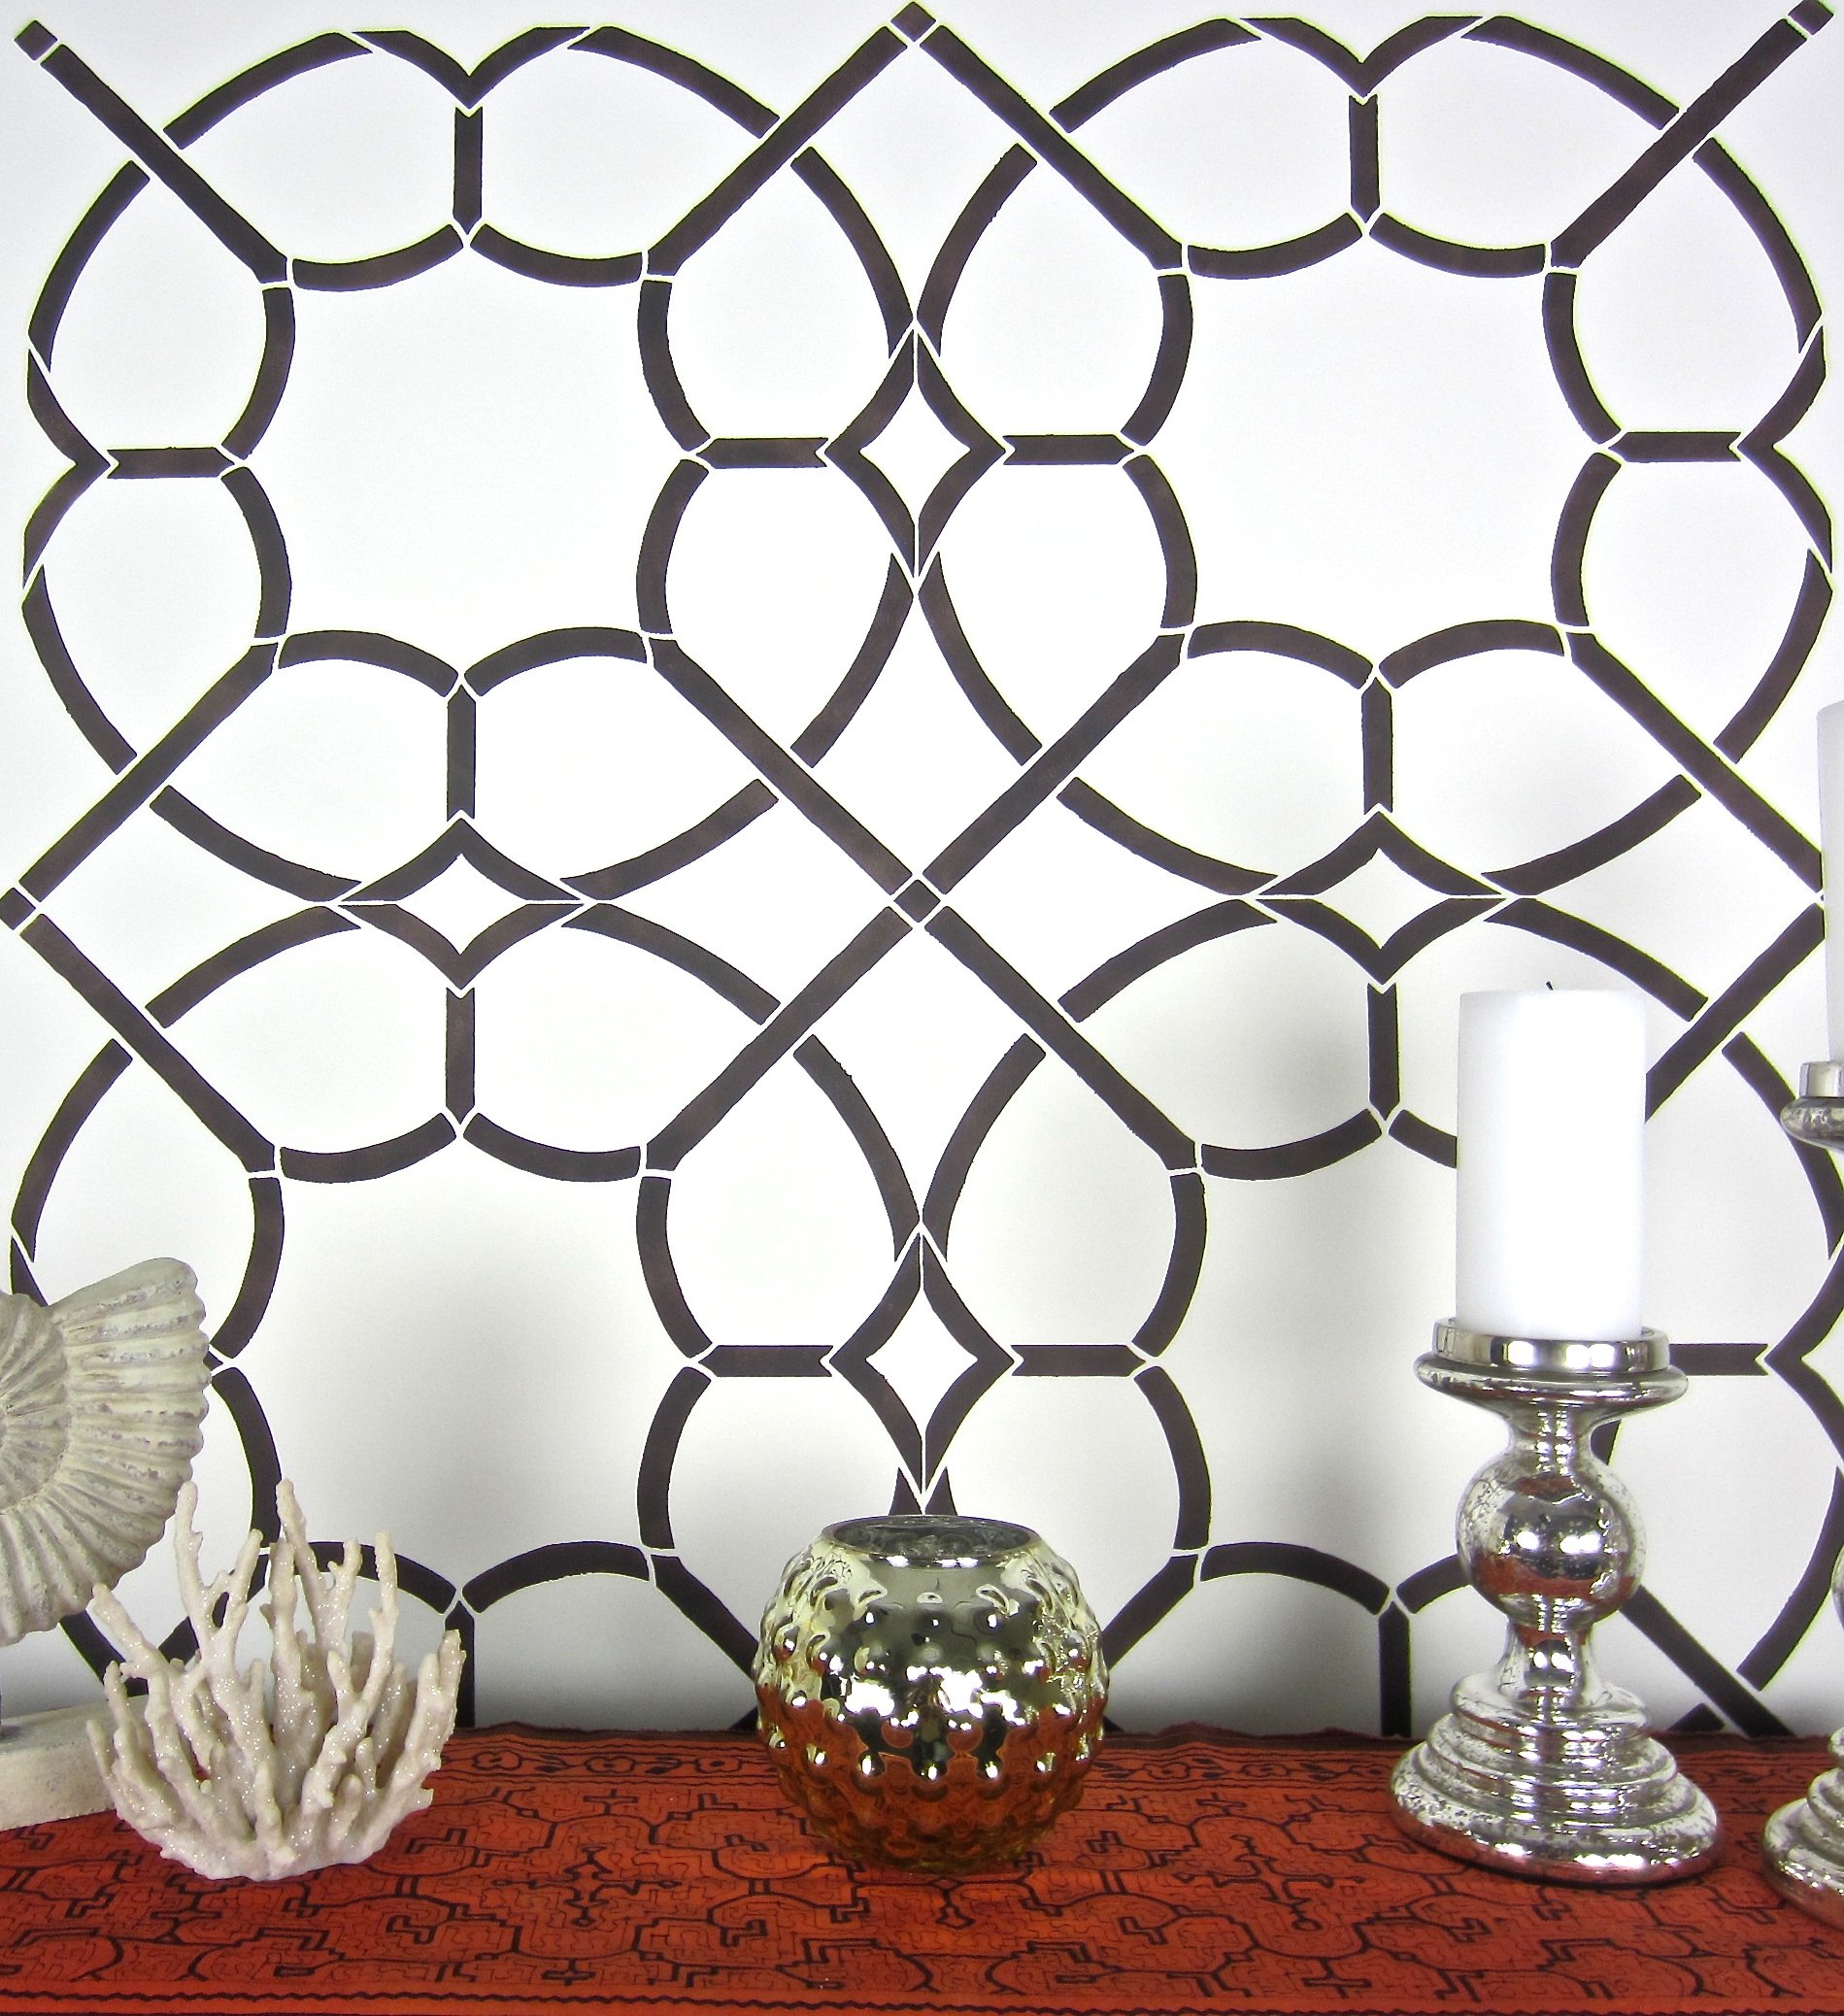 Cutting Edge Stencils shares how to stencil an accent wall using the Coco Trellis Allover pattern. http://www.cuttingedgestencils.com/coco-trellis-allover-pattern-stencil.html